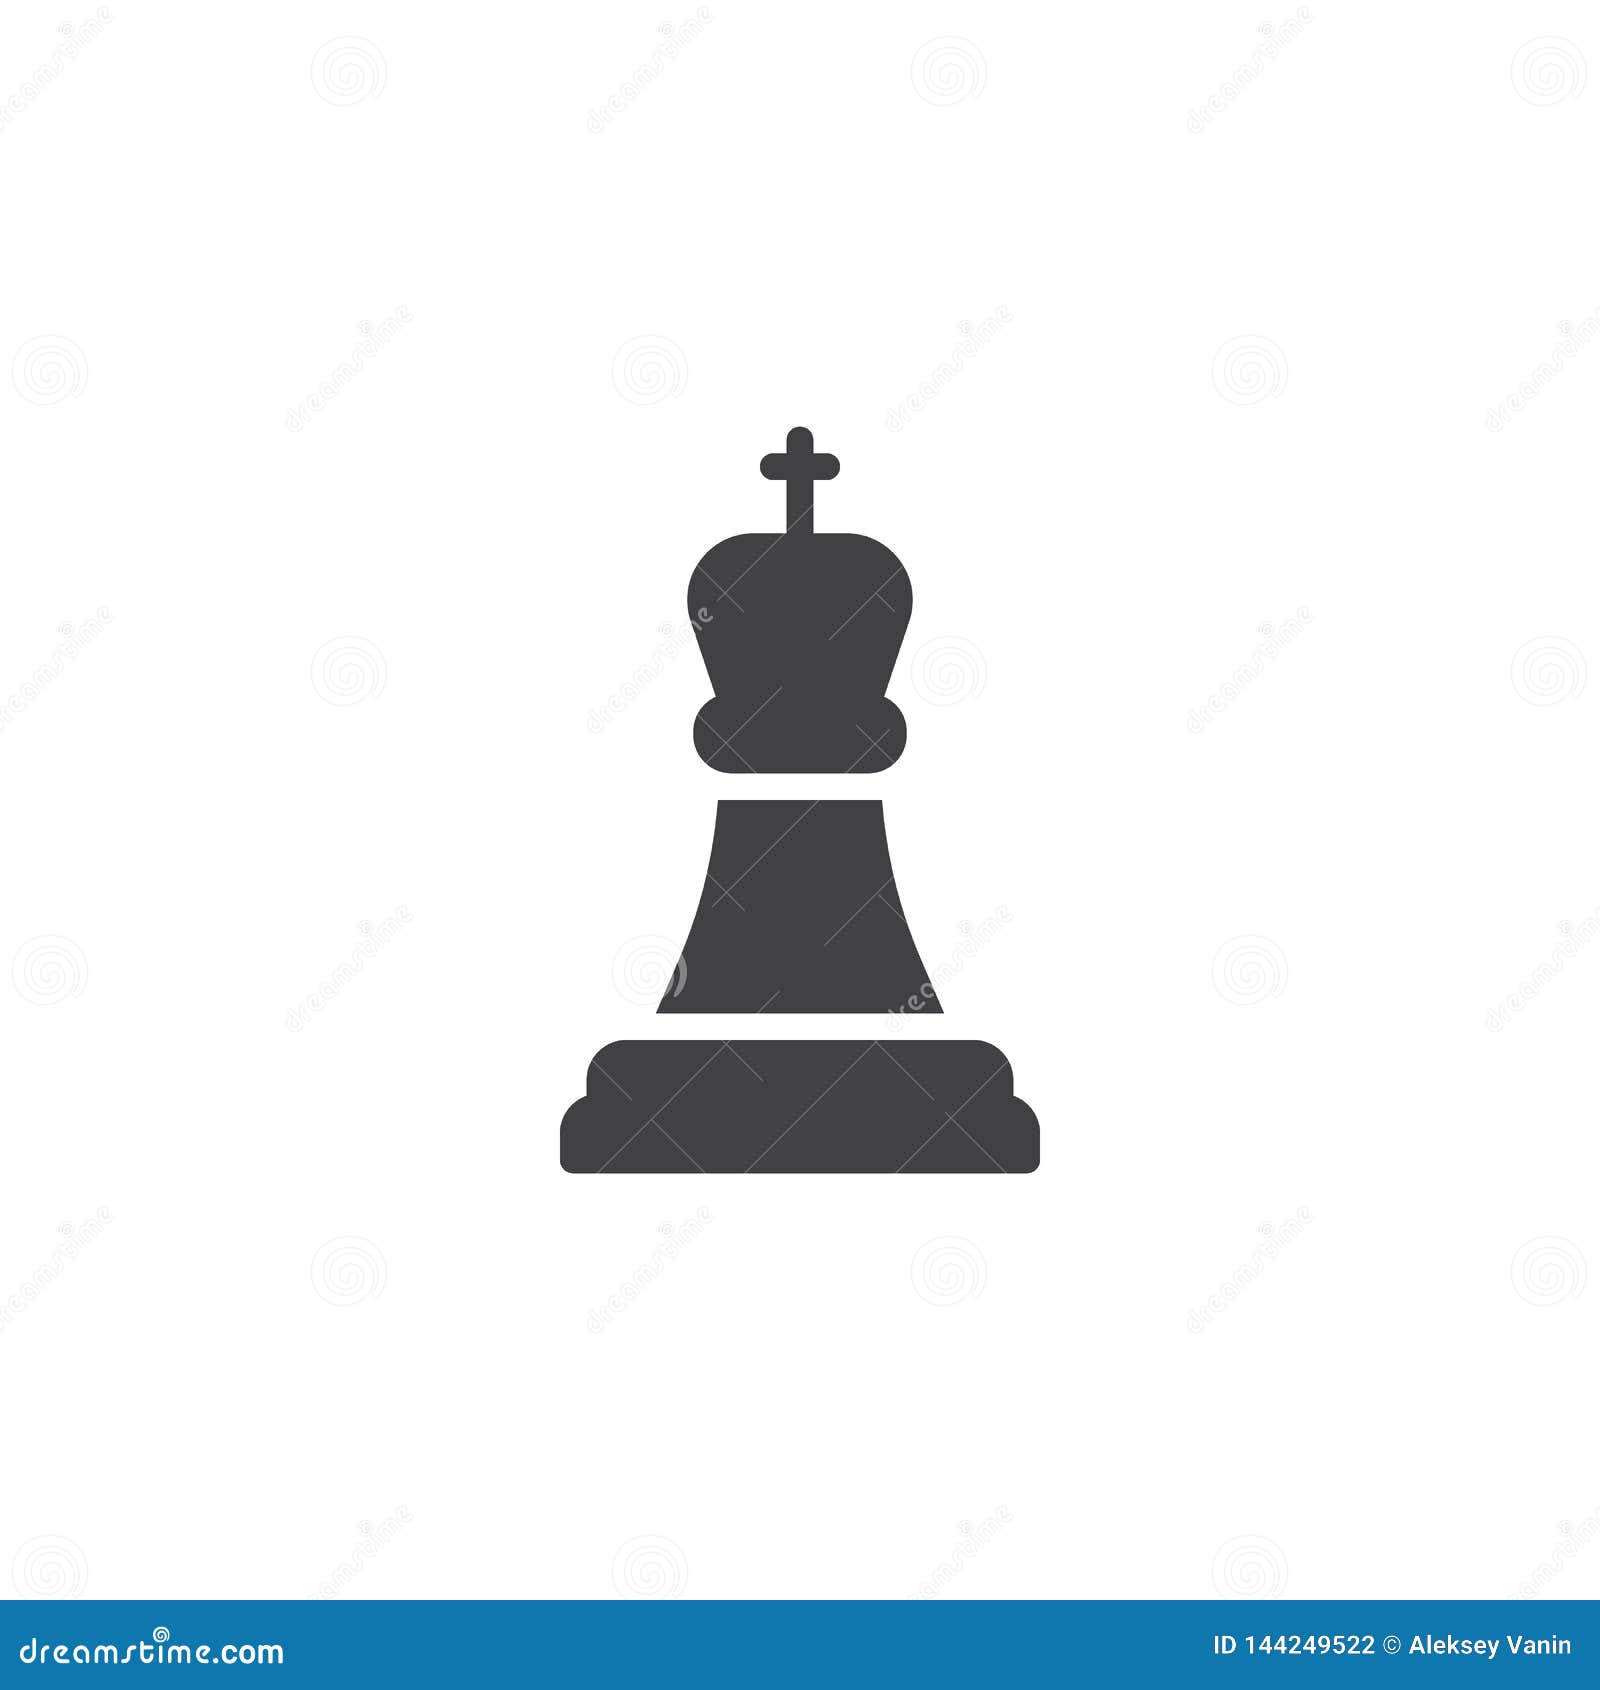 Chess king vector icon stock vector. Illustration of king - 144249522